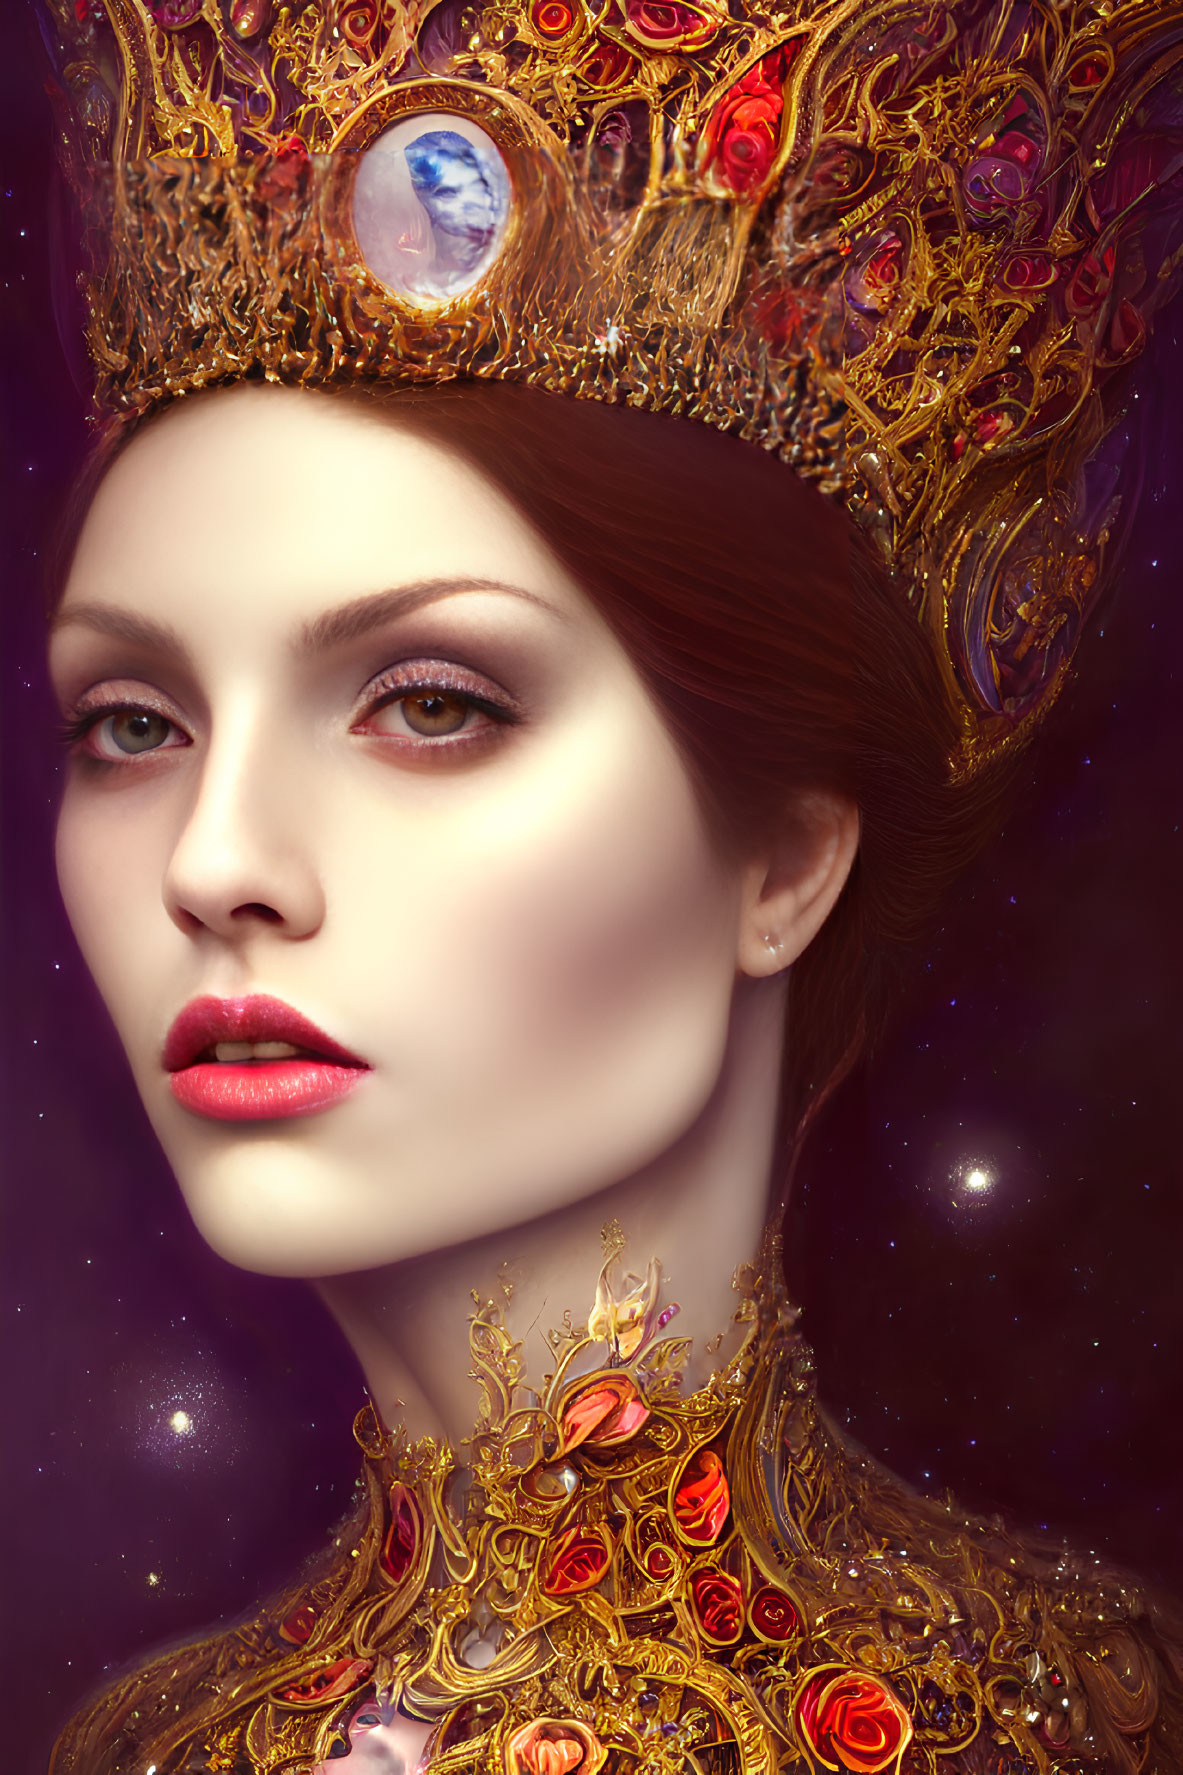 Fair-skinned woman with red lips wearing golden crown and rose necklace on cosmic purple backdrop